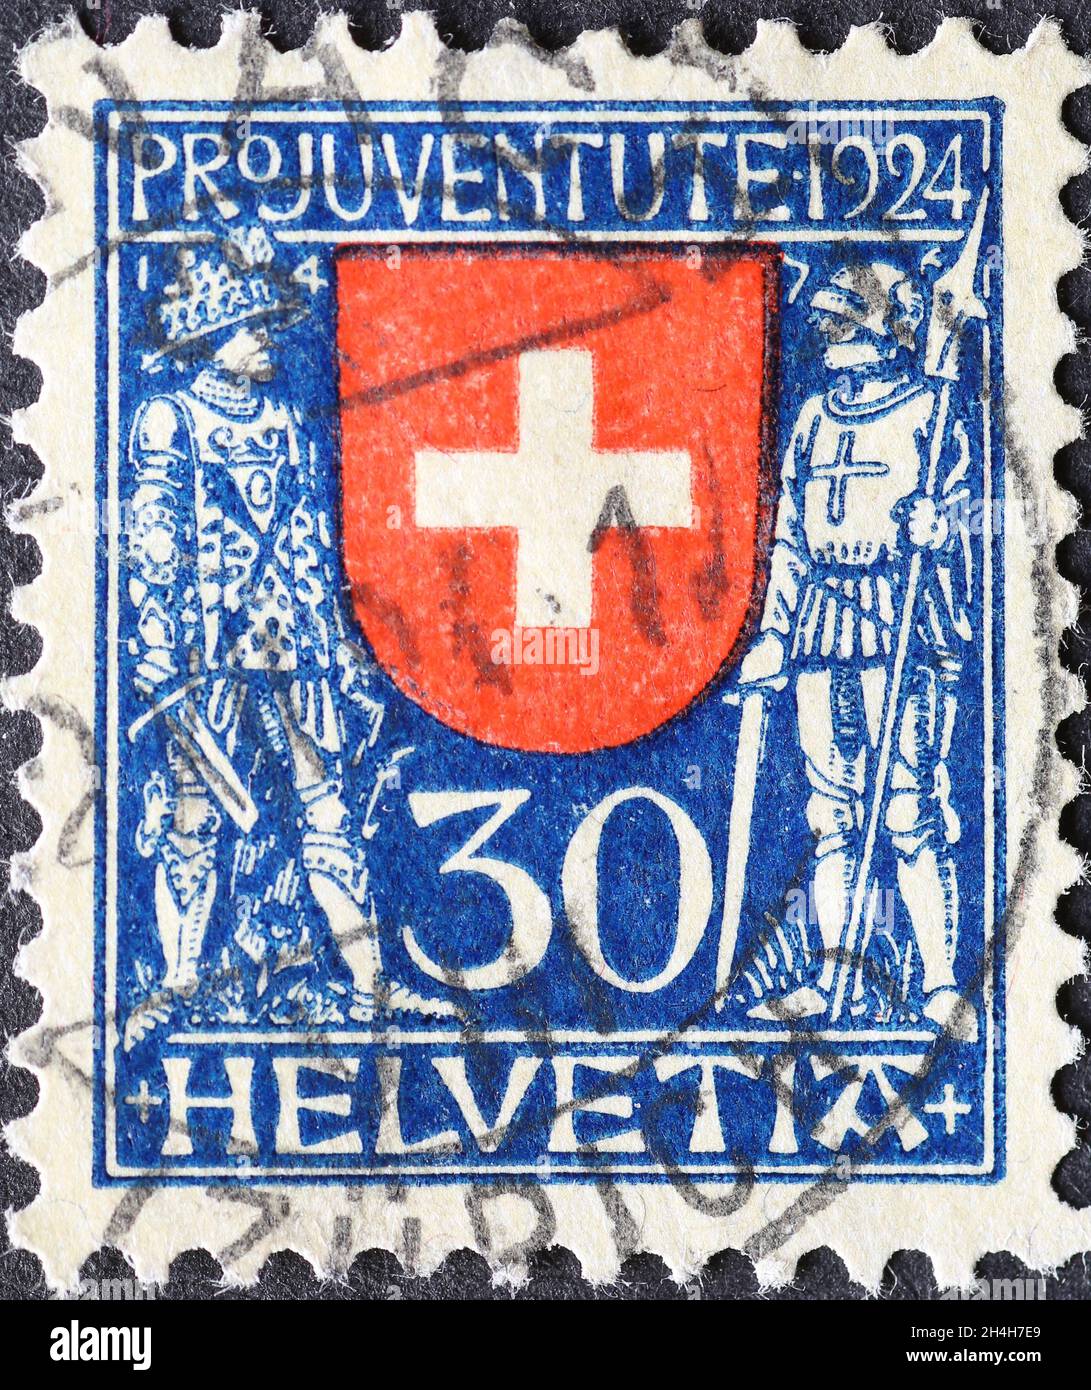 Switzerland - Circa 1924: a postage stamp printed in the Switzerland showing the federal coat of arms of Switzerland with the Burgundian Knight and a Stock Photo